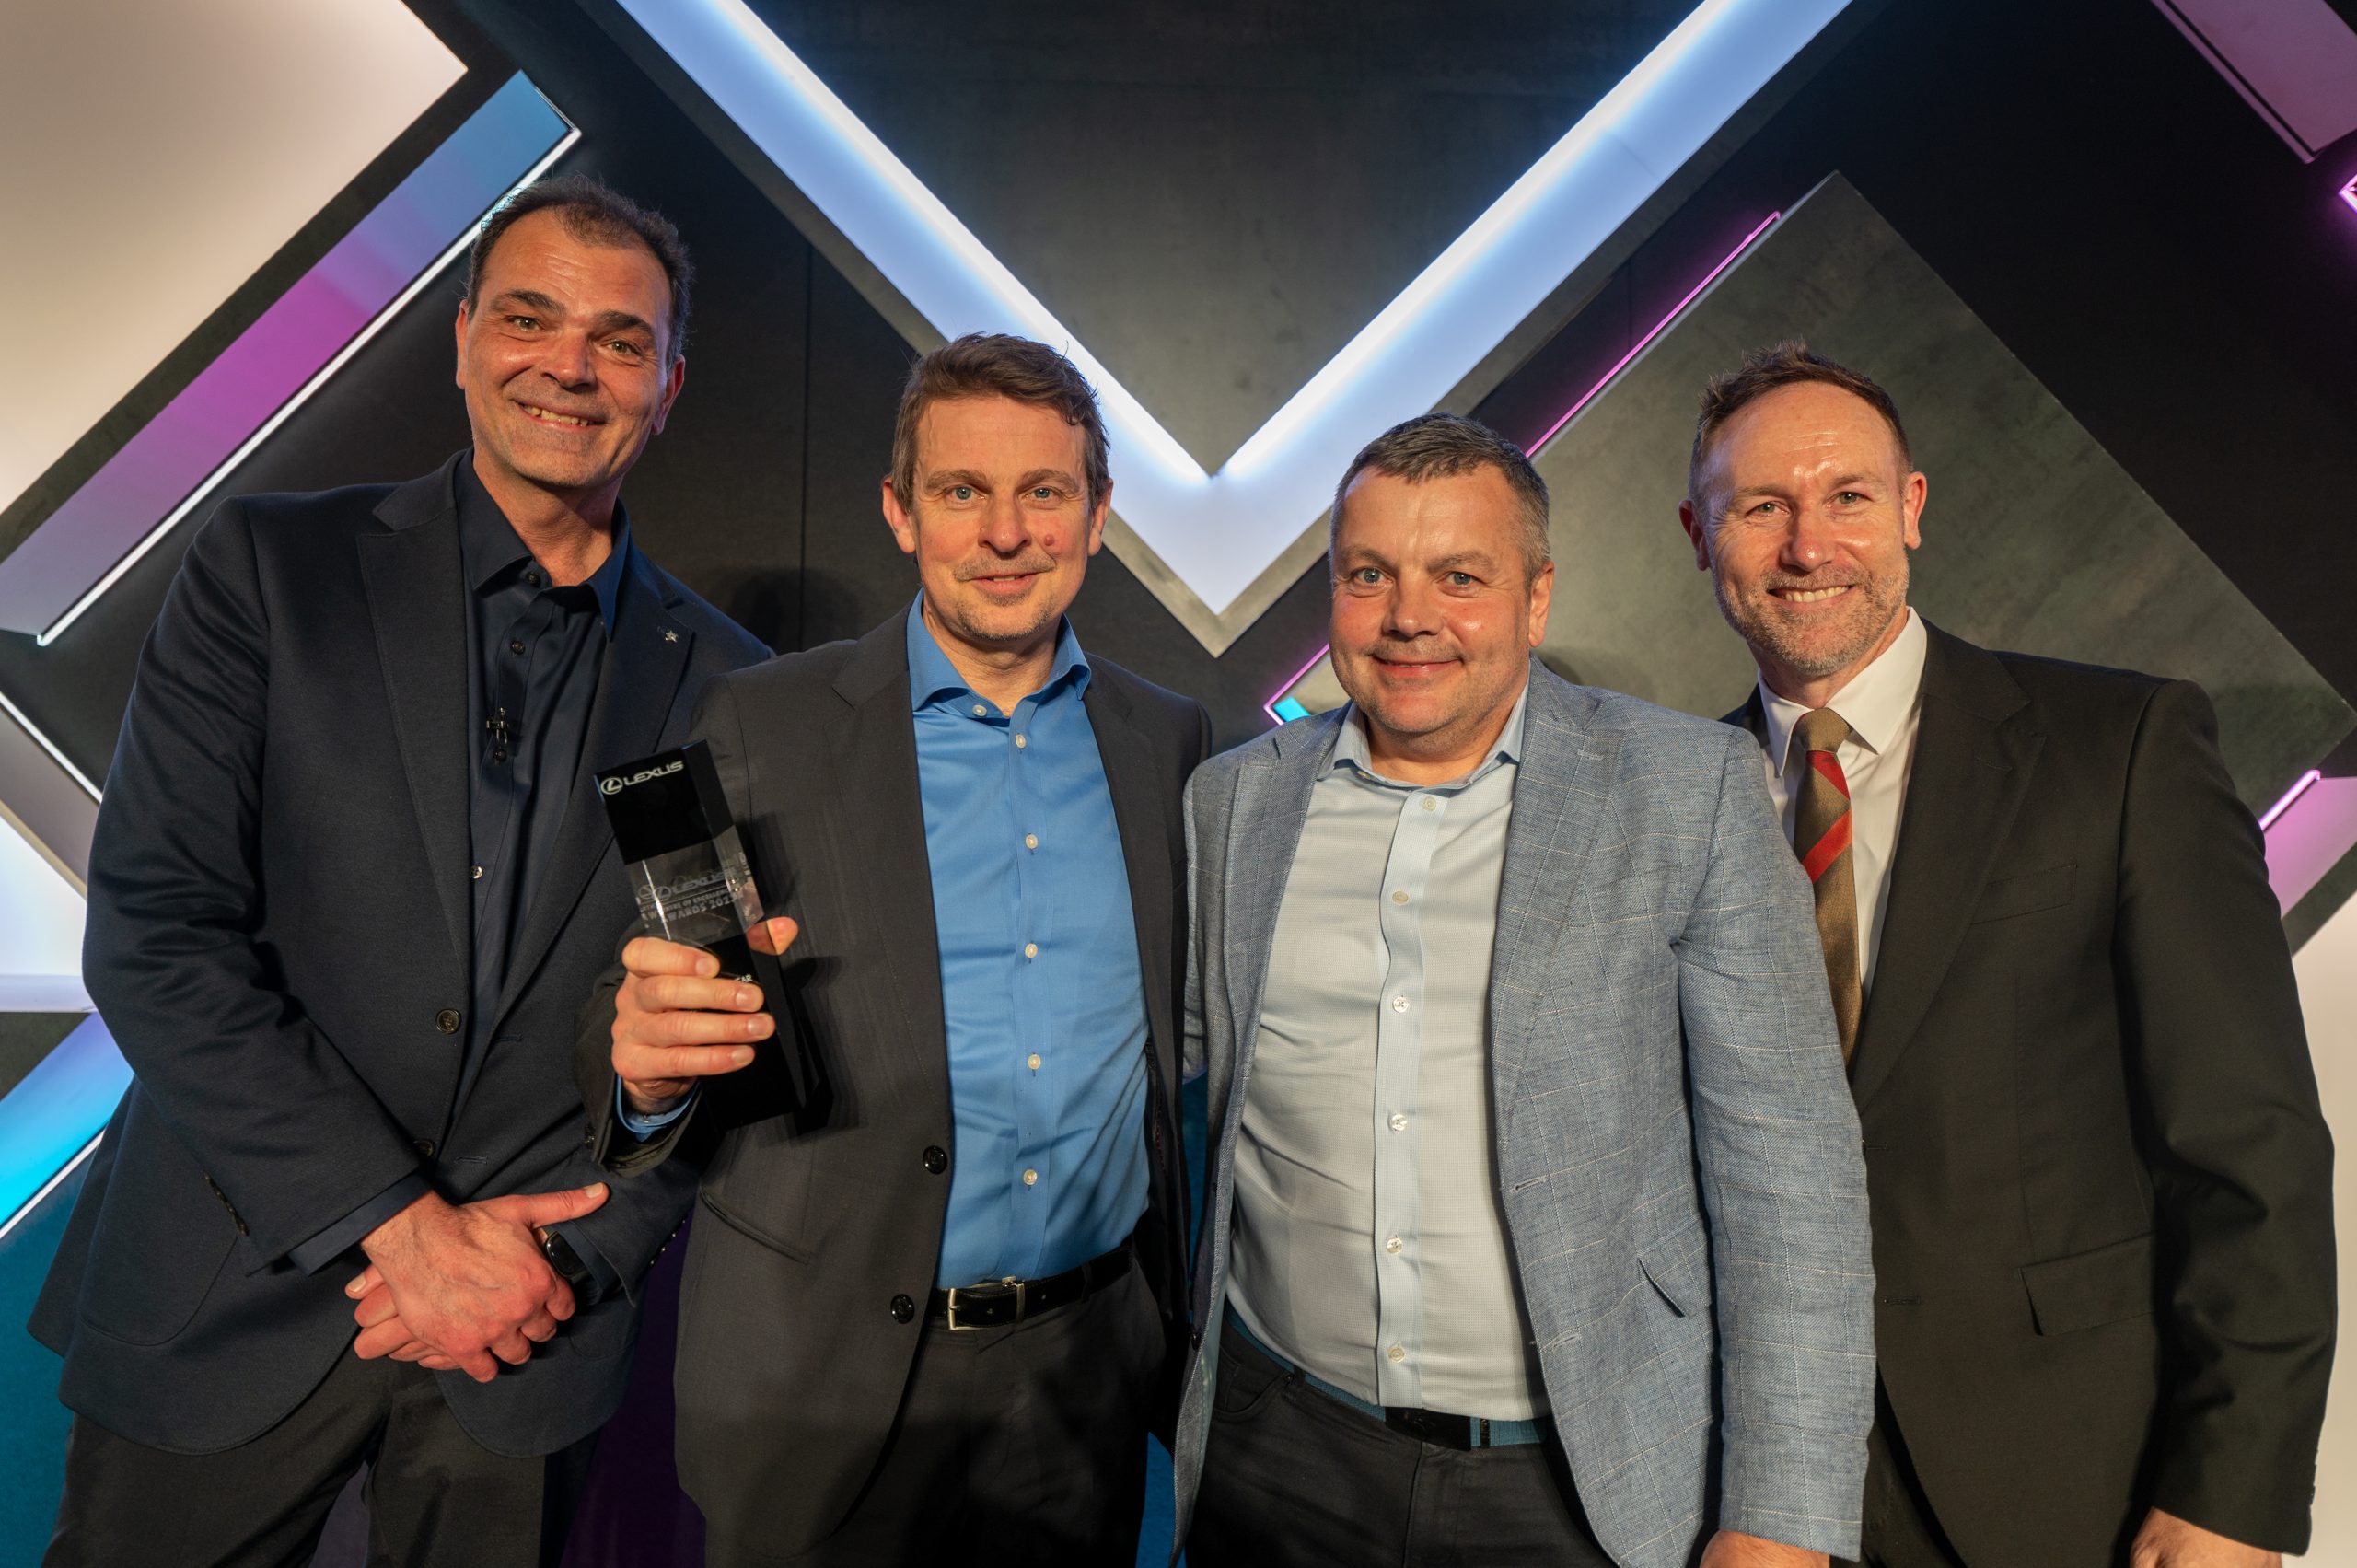 From L to R: Chris Hayes, Director, Lexus UK, Tim Swindin and Andrew Mallory from Vantage Group, and Scott Thompson, President and Managing Director, of Toyota (GB) PLC